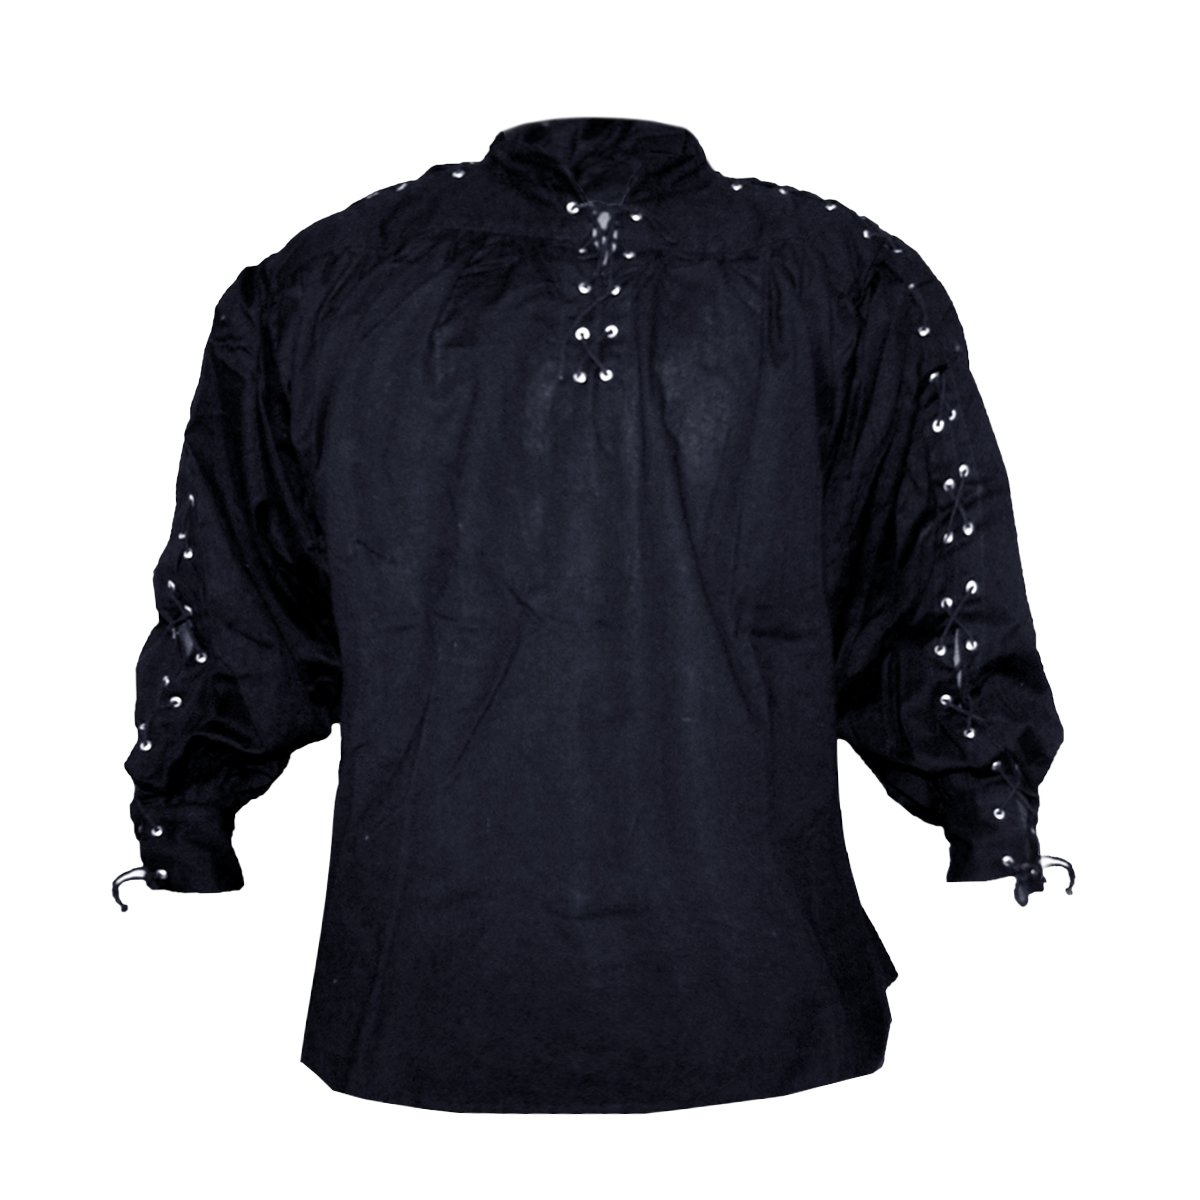 Collarless cotton shirt (laced neck & sleeves) - black, size XXL